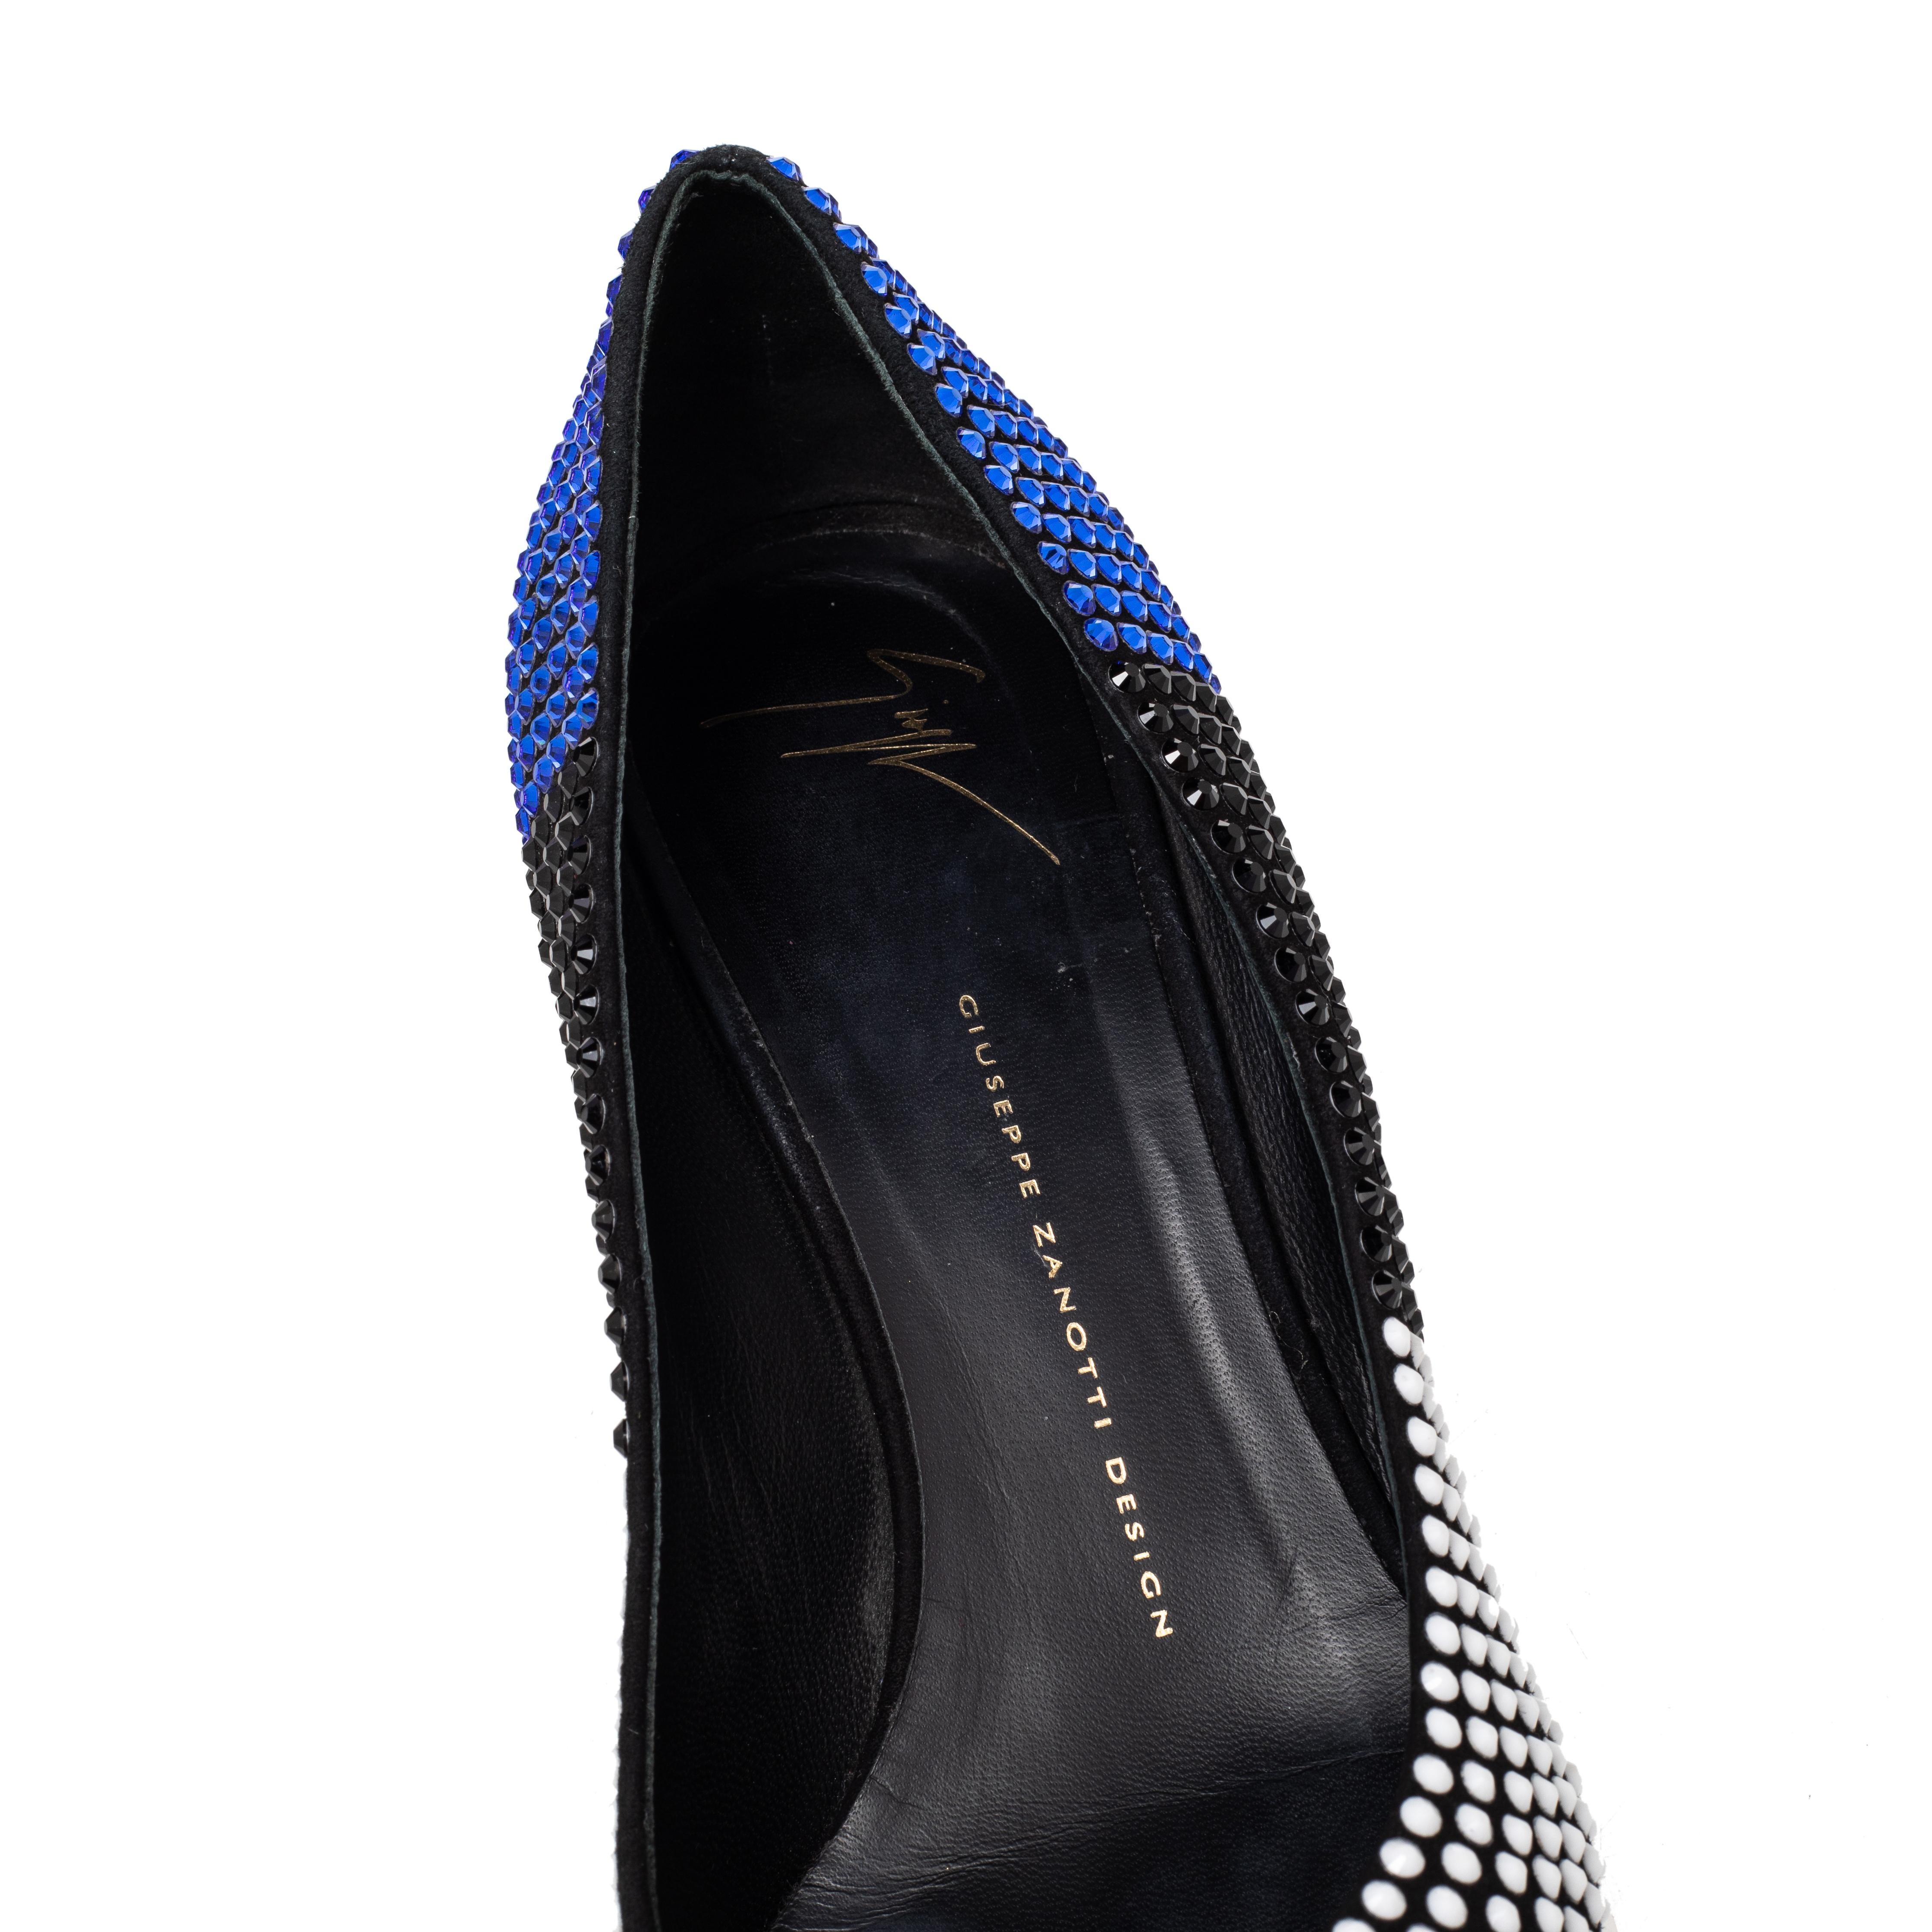 Admired for exquisite craftsmanship, Giuseppe Zanotti displays some of the best pumps for all occasions. Crafted from crystal-embellished suede and lined with leather, these pumps are simply mesmerizing. They are complete with pointed toes and 6 cm